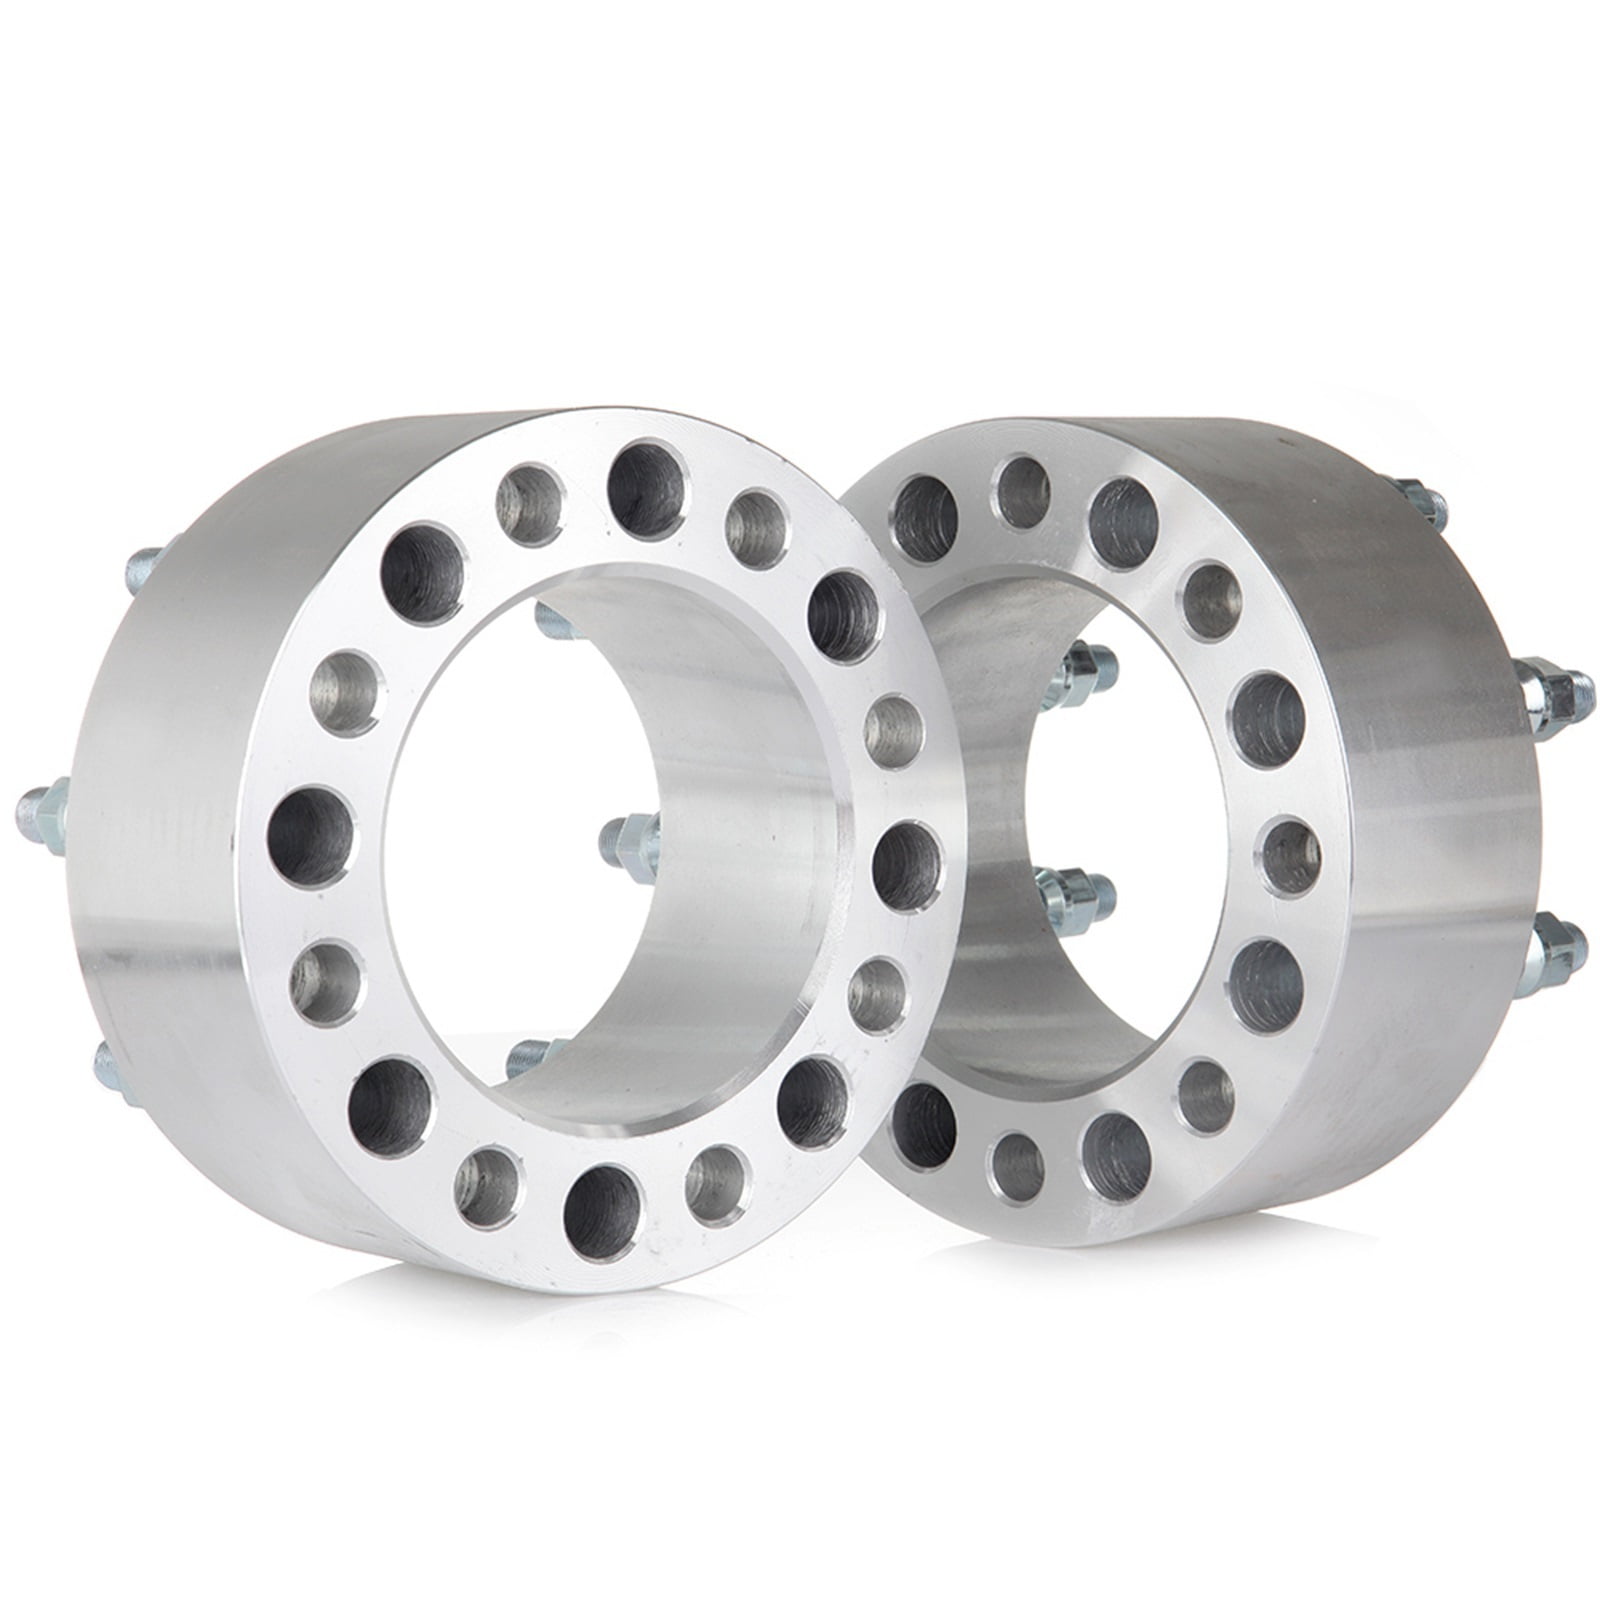 ECCPP 2X 8 Lug Wheel Spacers 1.5 8x6.5 to 8x6.5 126.15mm 14x1.5 Compatible with for Chevrolet Avalanche 2500 for Chevrolet 1500 HD 2500 HD for GMC Sierra 1500HD 2500HD 3500HD 